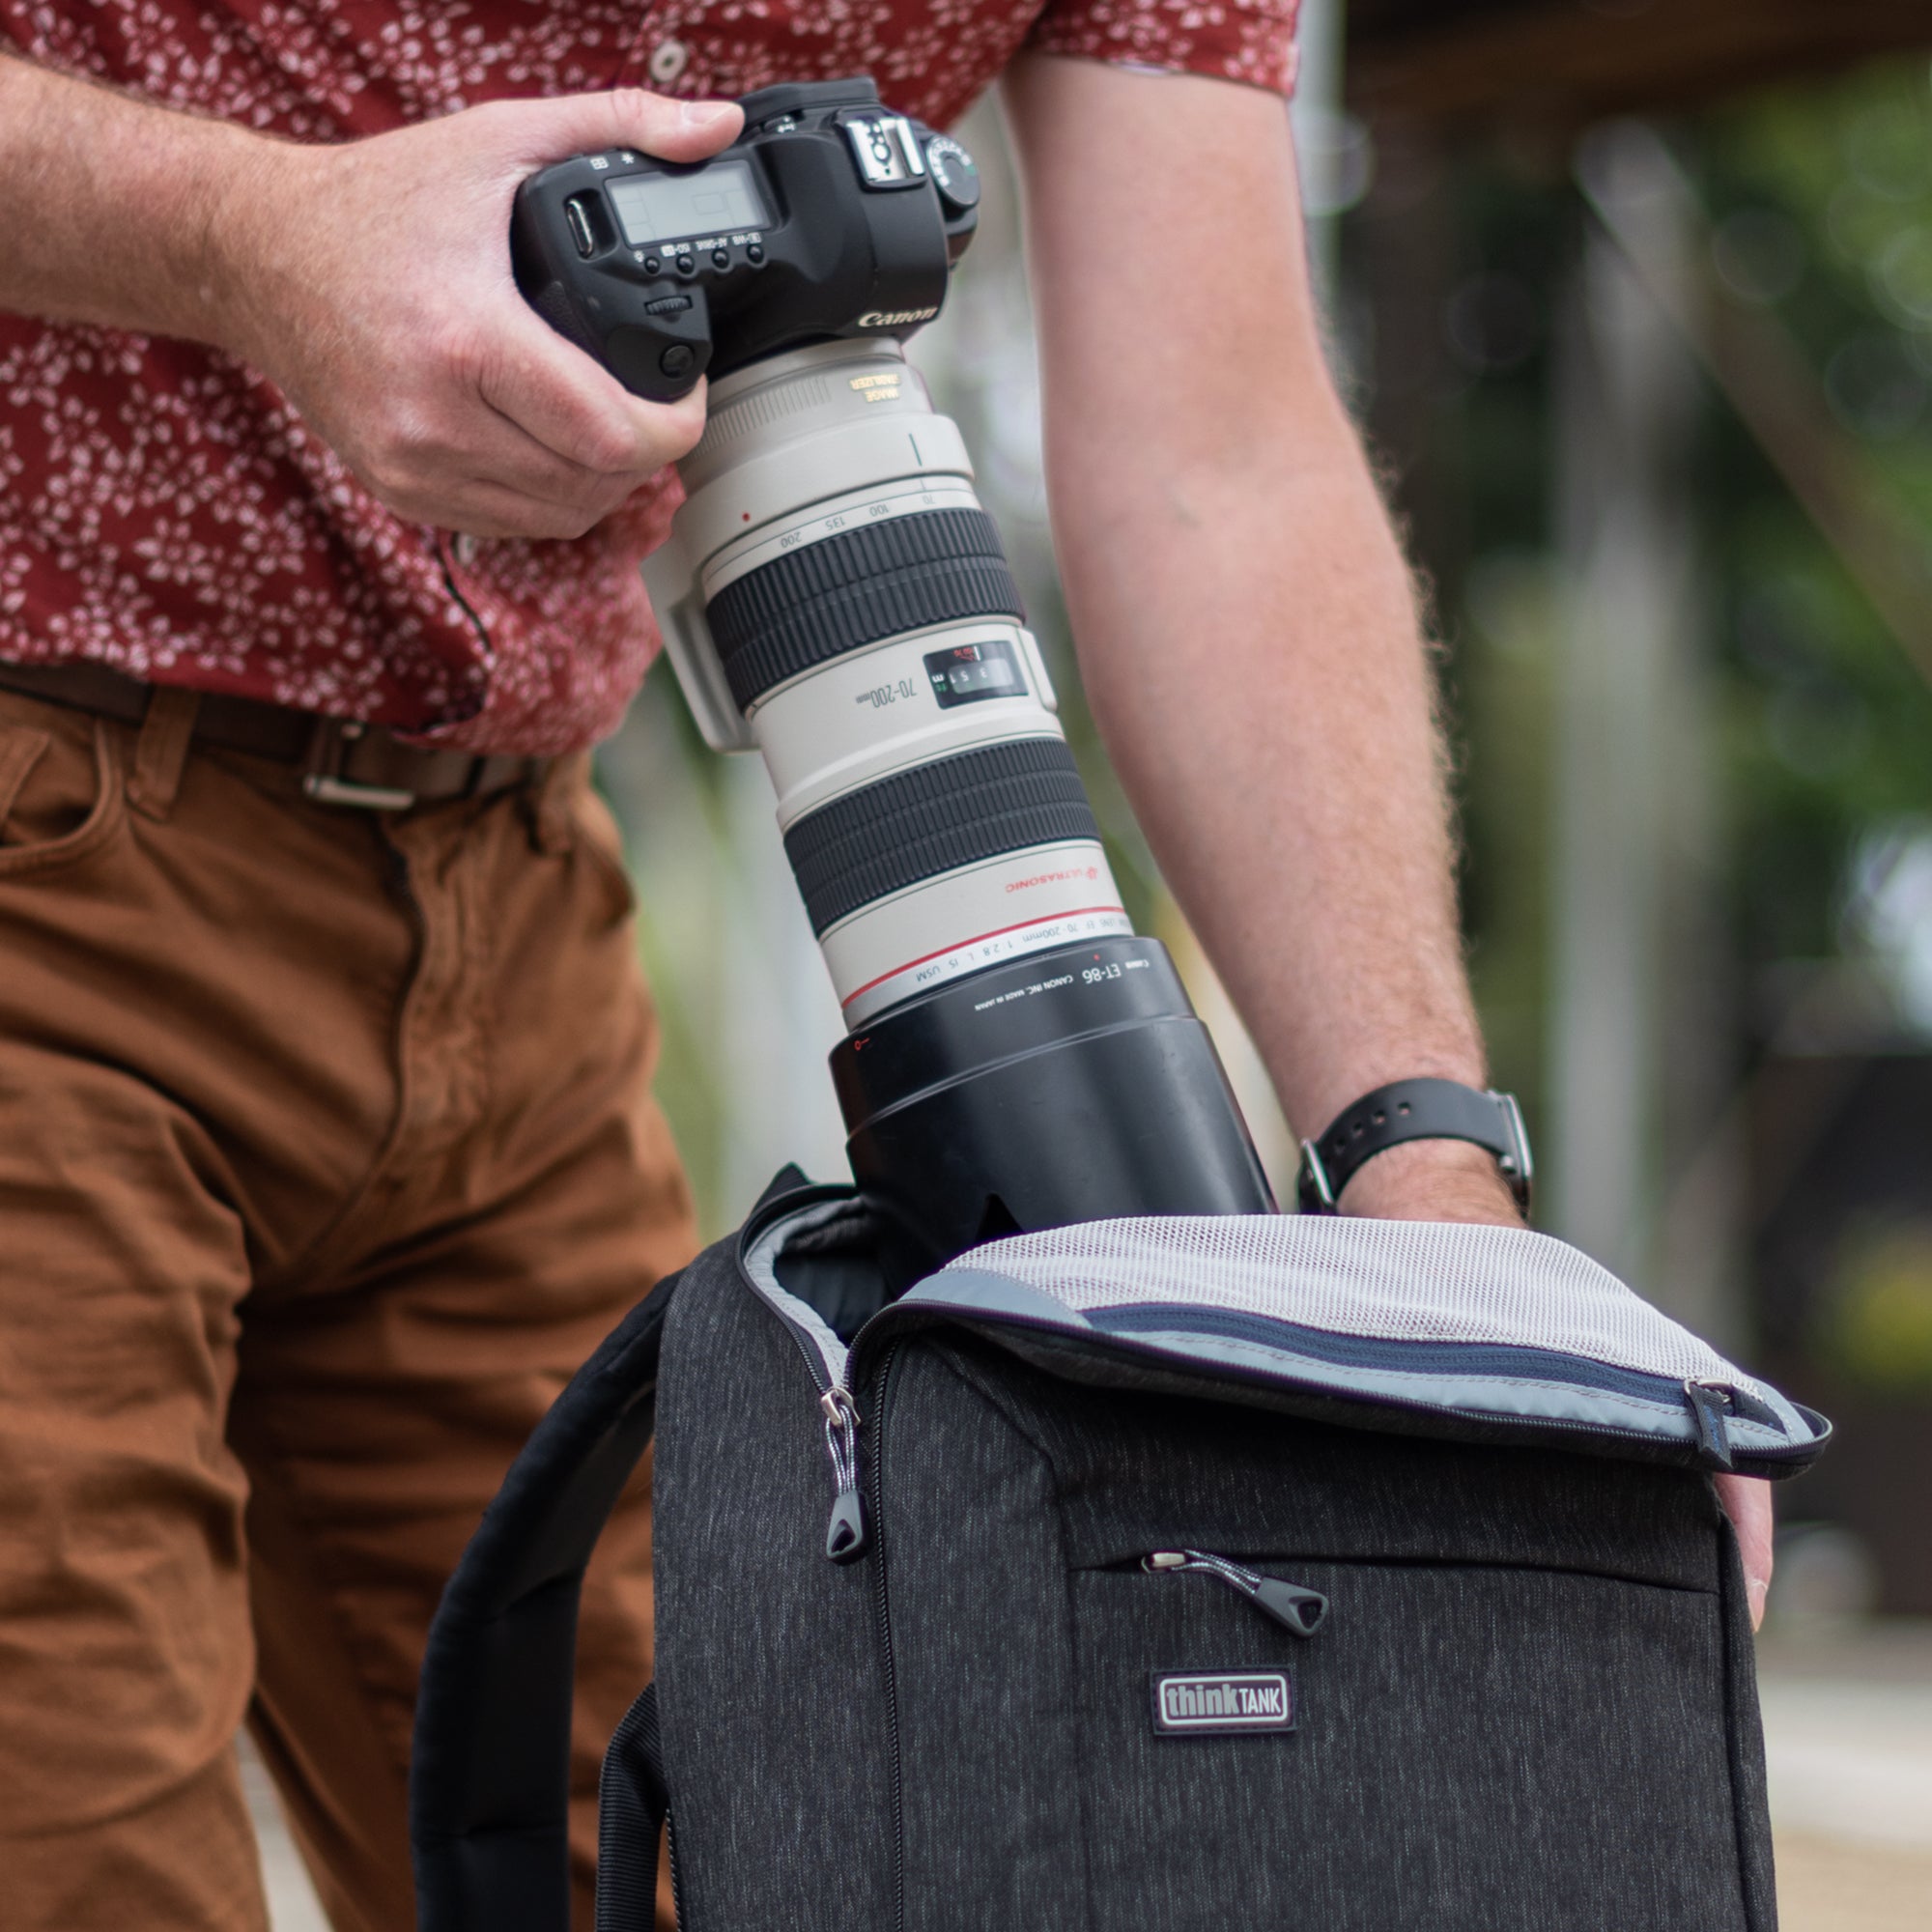 Top zippered panel provides quick access to essential camera gear